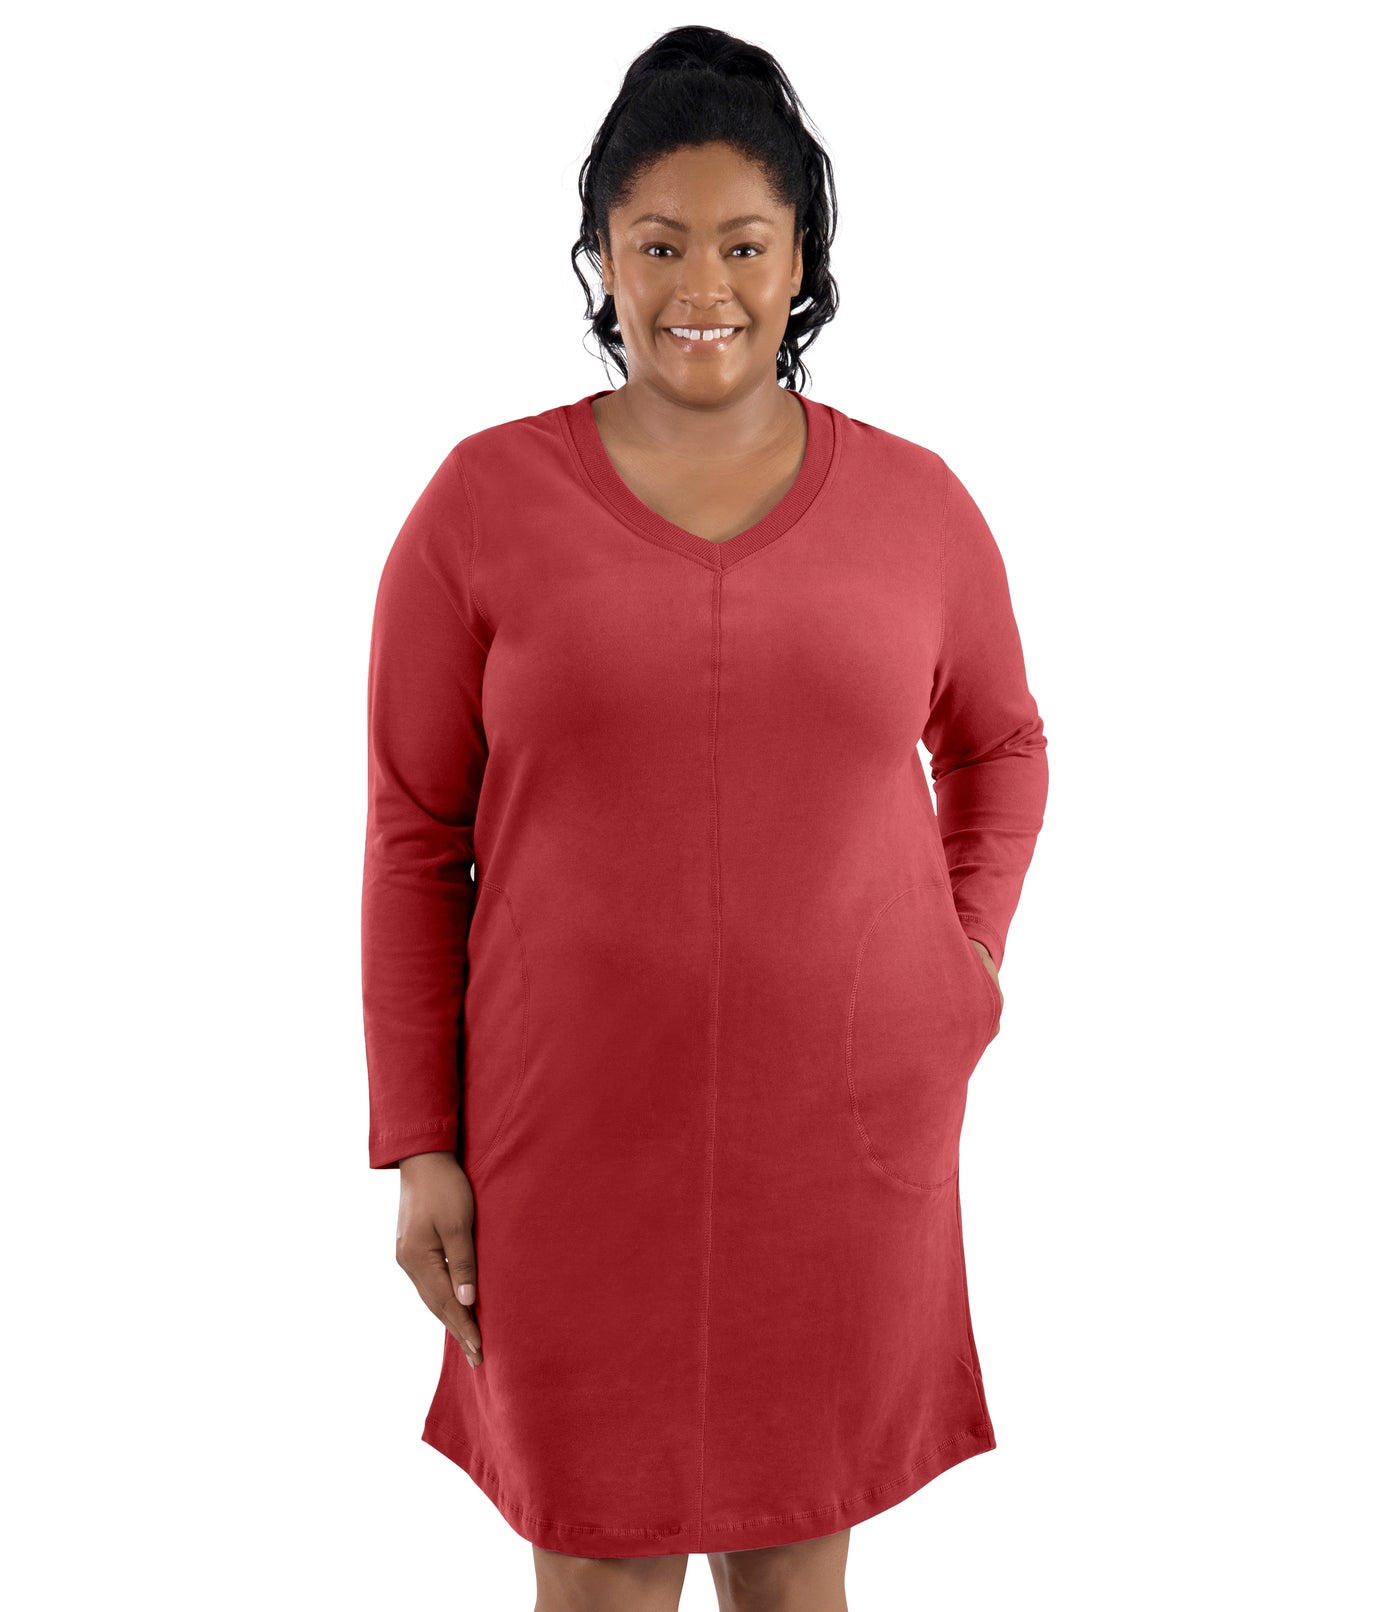 Plus-size model, facing forward, left hand in dress pocket. Wearing JunoActive's Legacy Cotton Casual Pocketed Long Sleeve Dress in Sedona red.